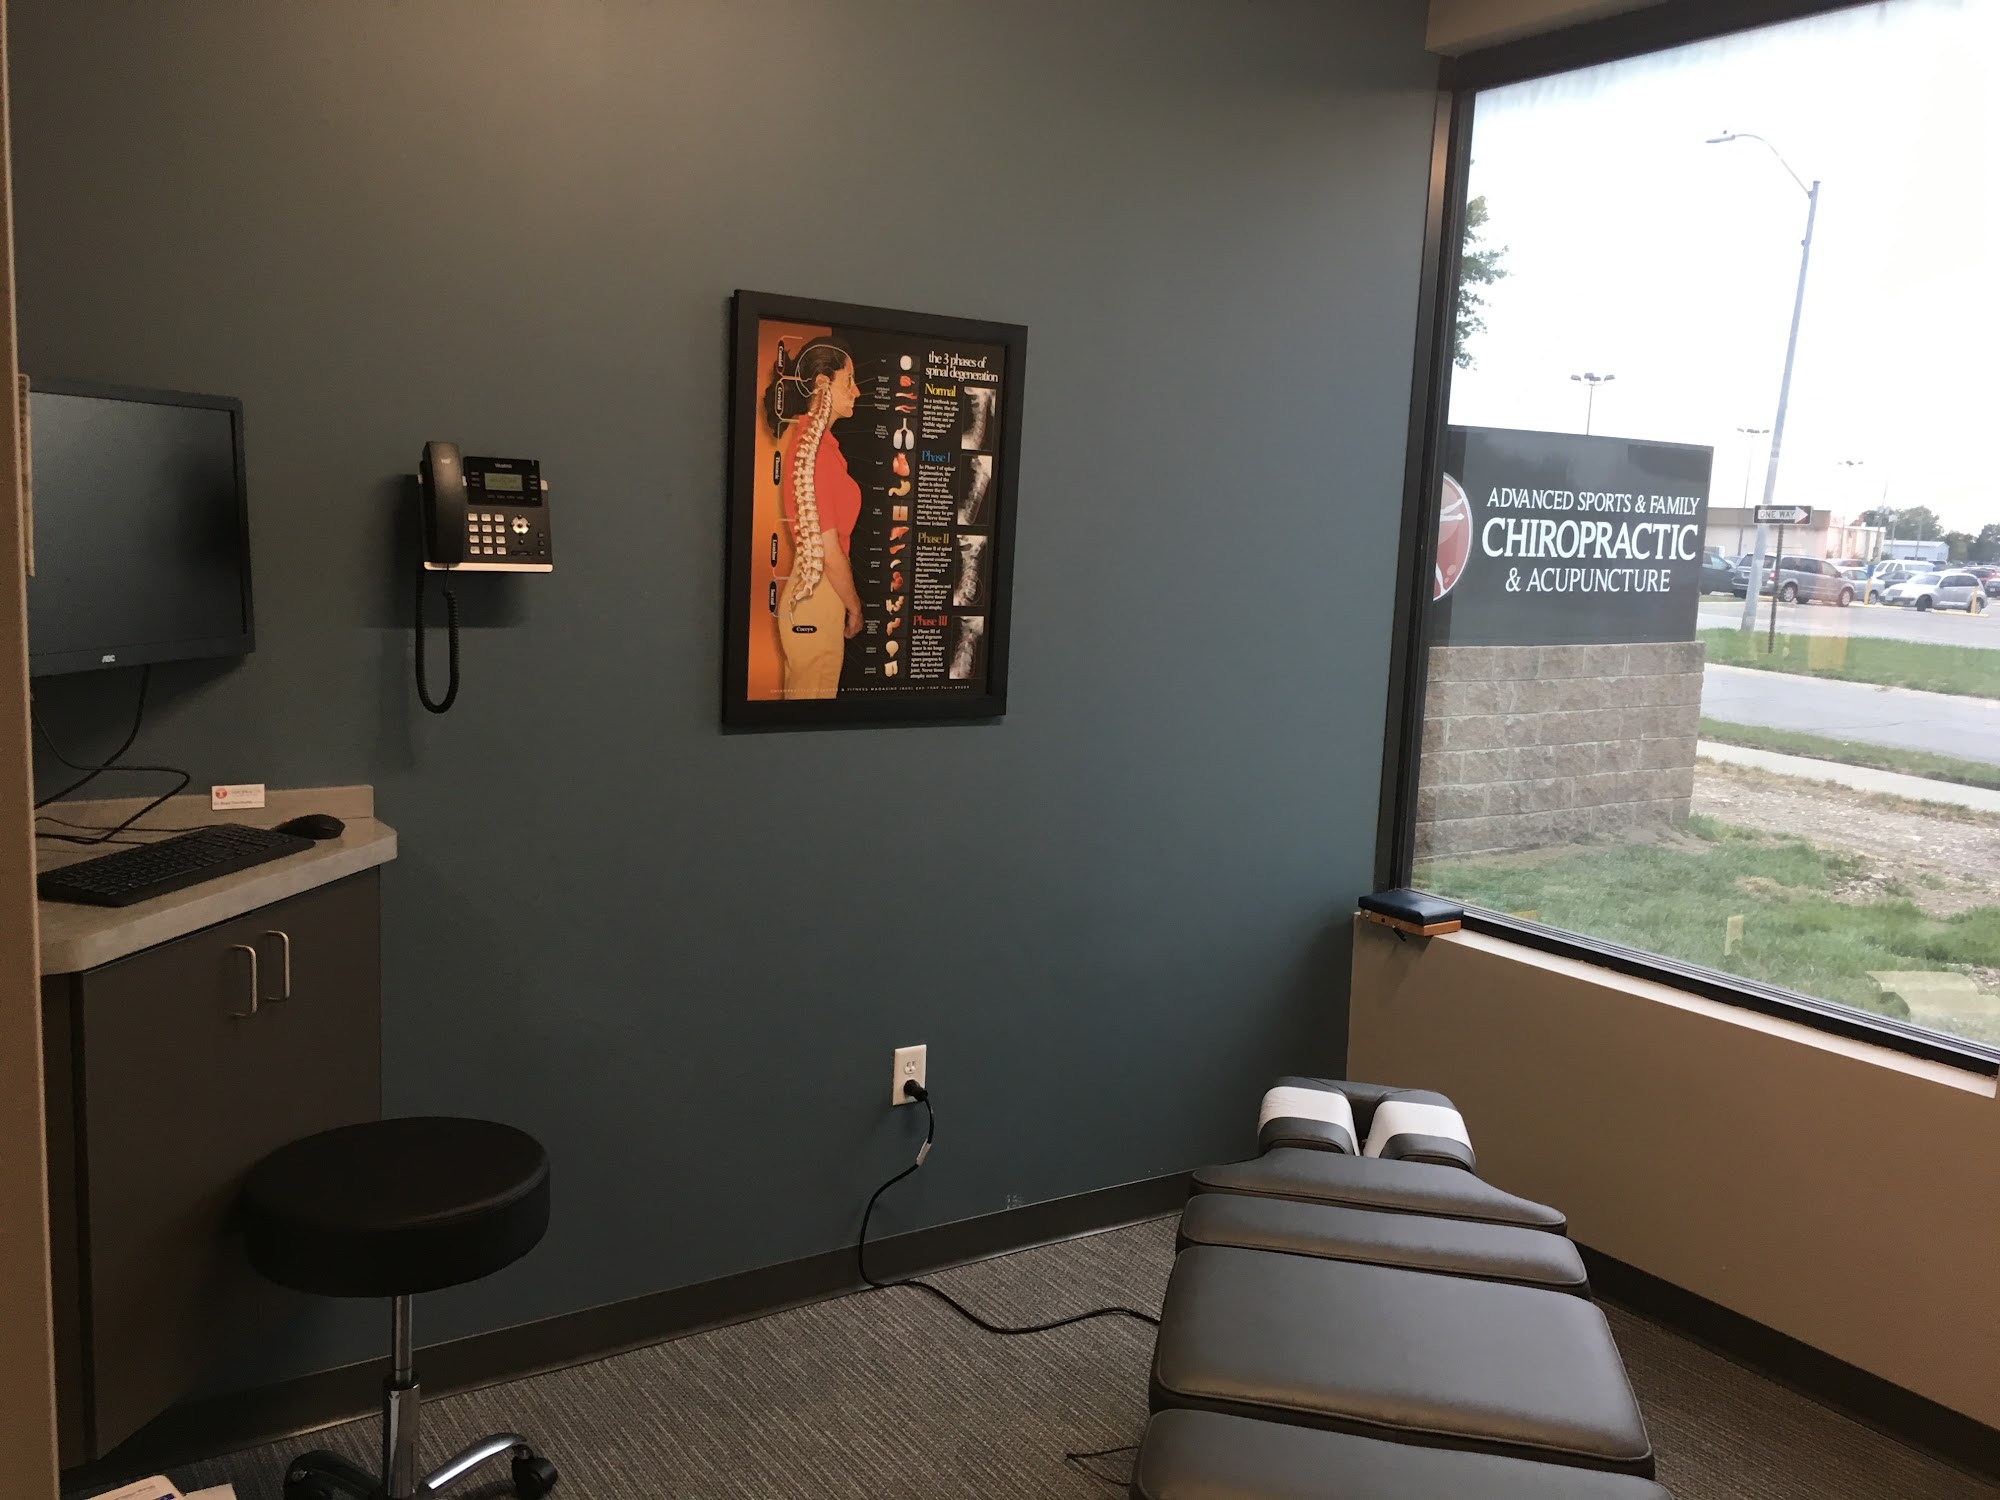 Advanced Sports & Family Chiropractic & Acupuncture: Belton/Raymore Location